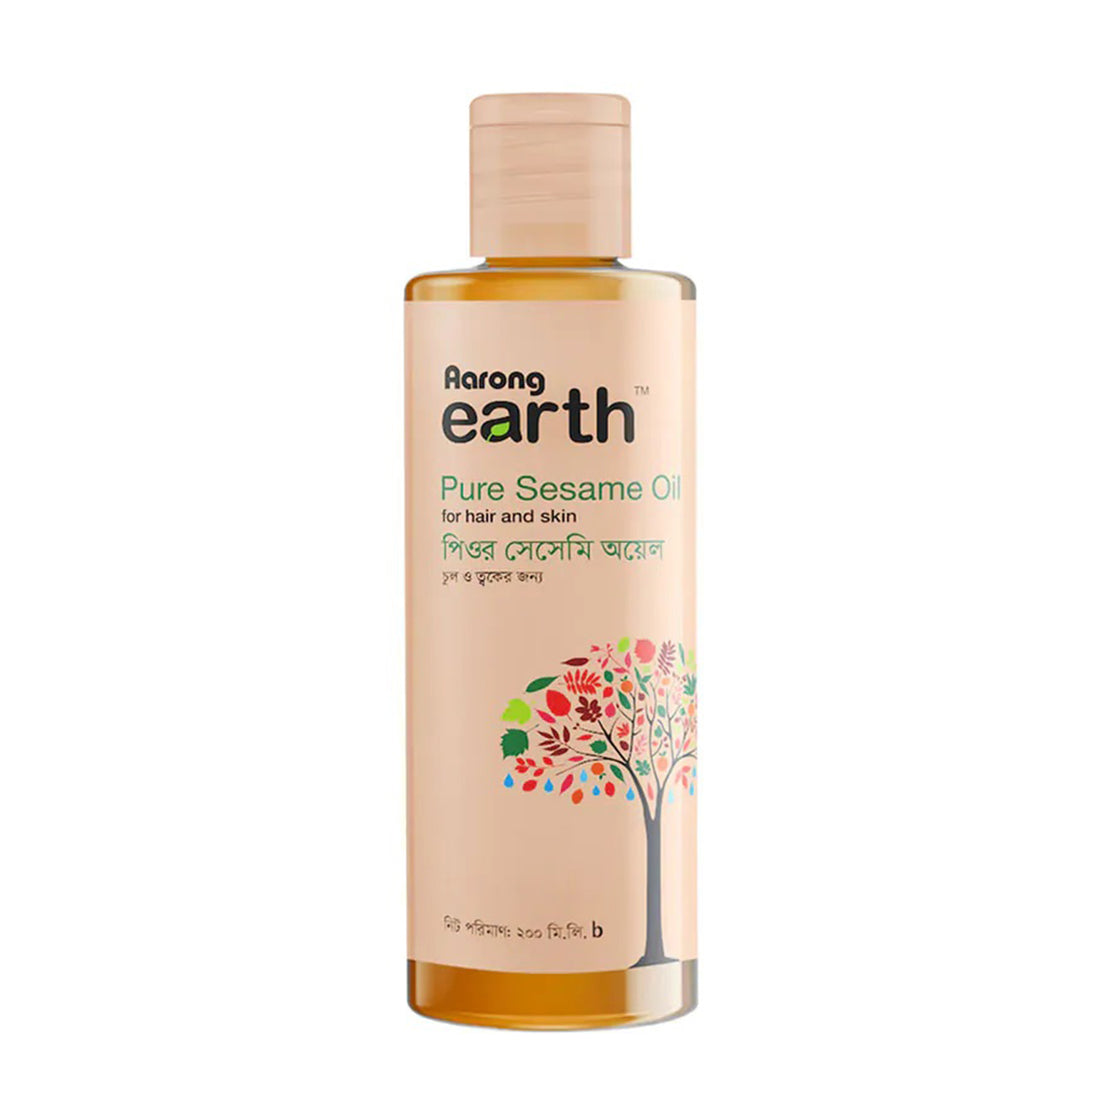 Aarong Earth Pure Sesame Oil for Hair and Skin (200ml)